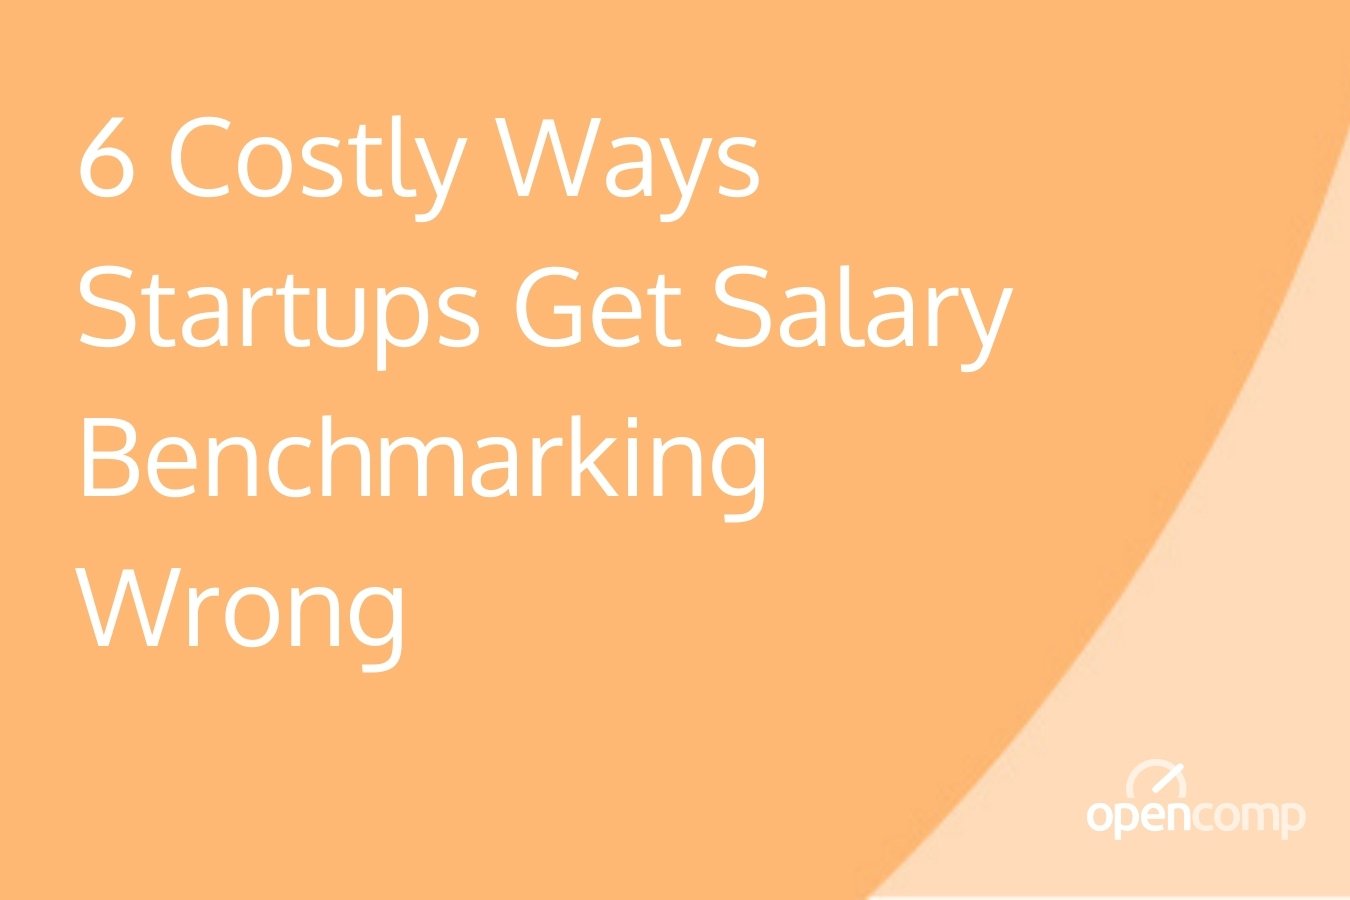 6 Costly Ways Startups Get Salary Benchmarking Wrong